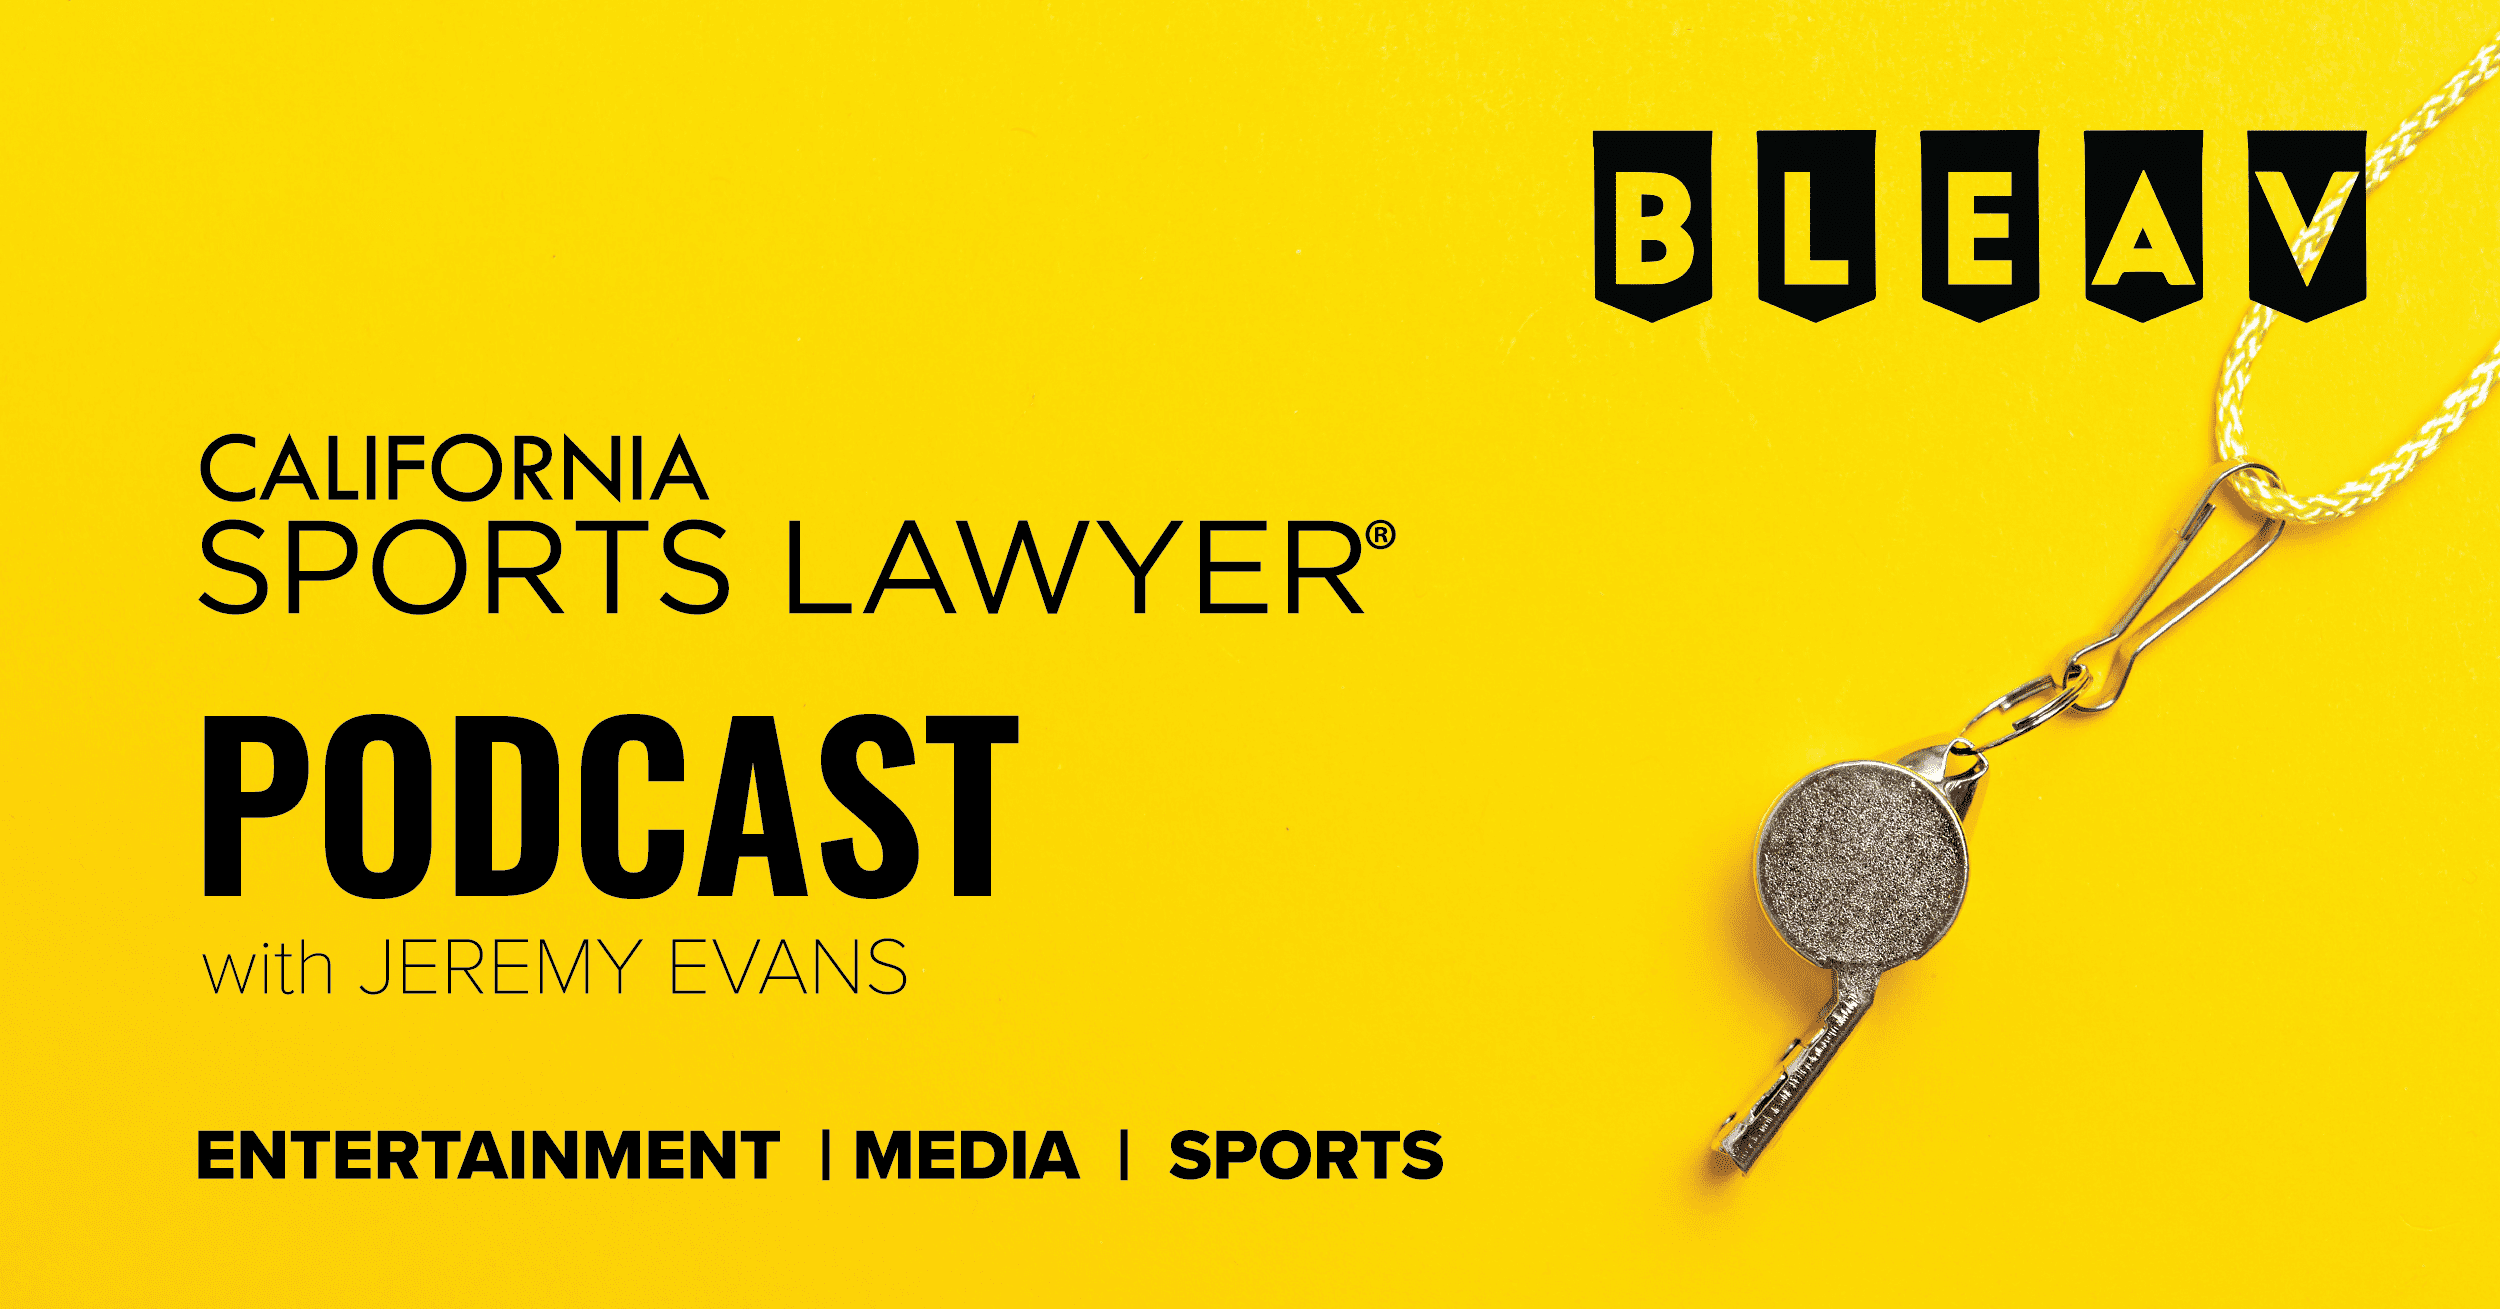 California Sports Lawyer® Podcast with Jeremy Evans: ESPN Looking for Growth with Sports Betting